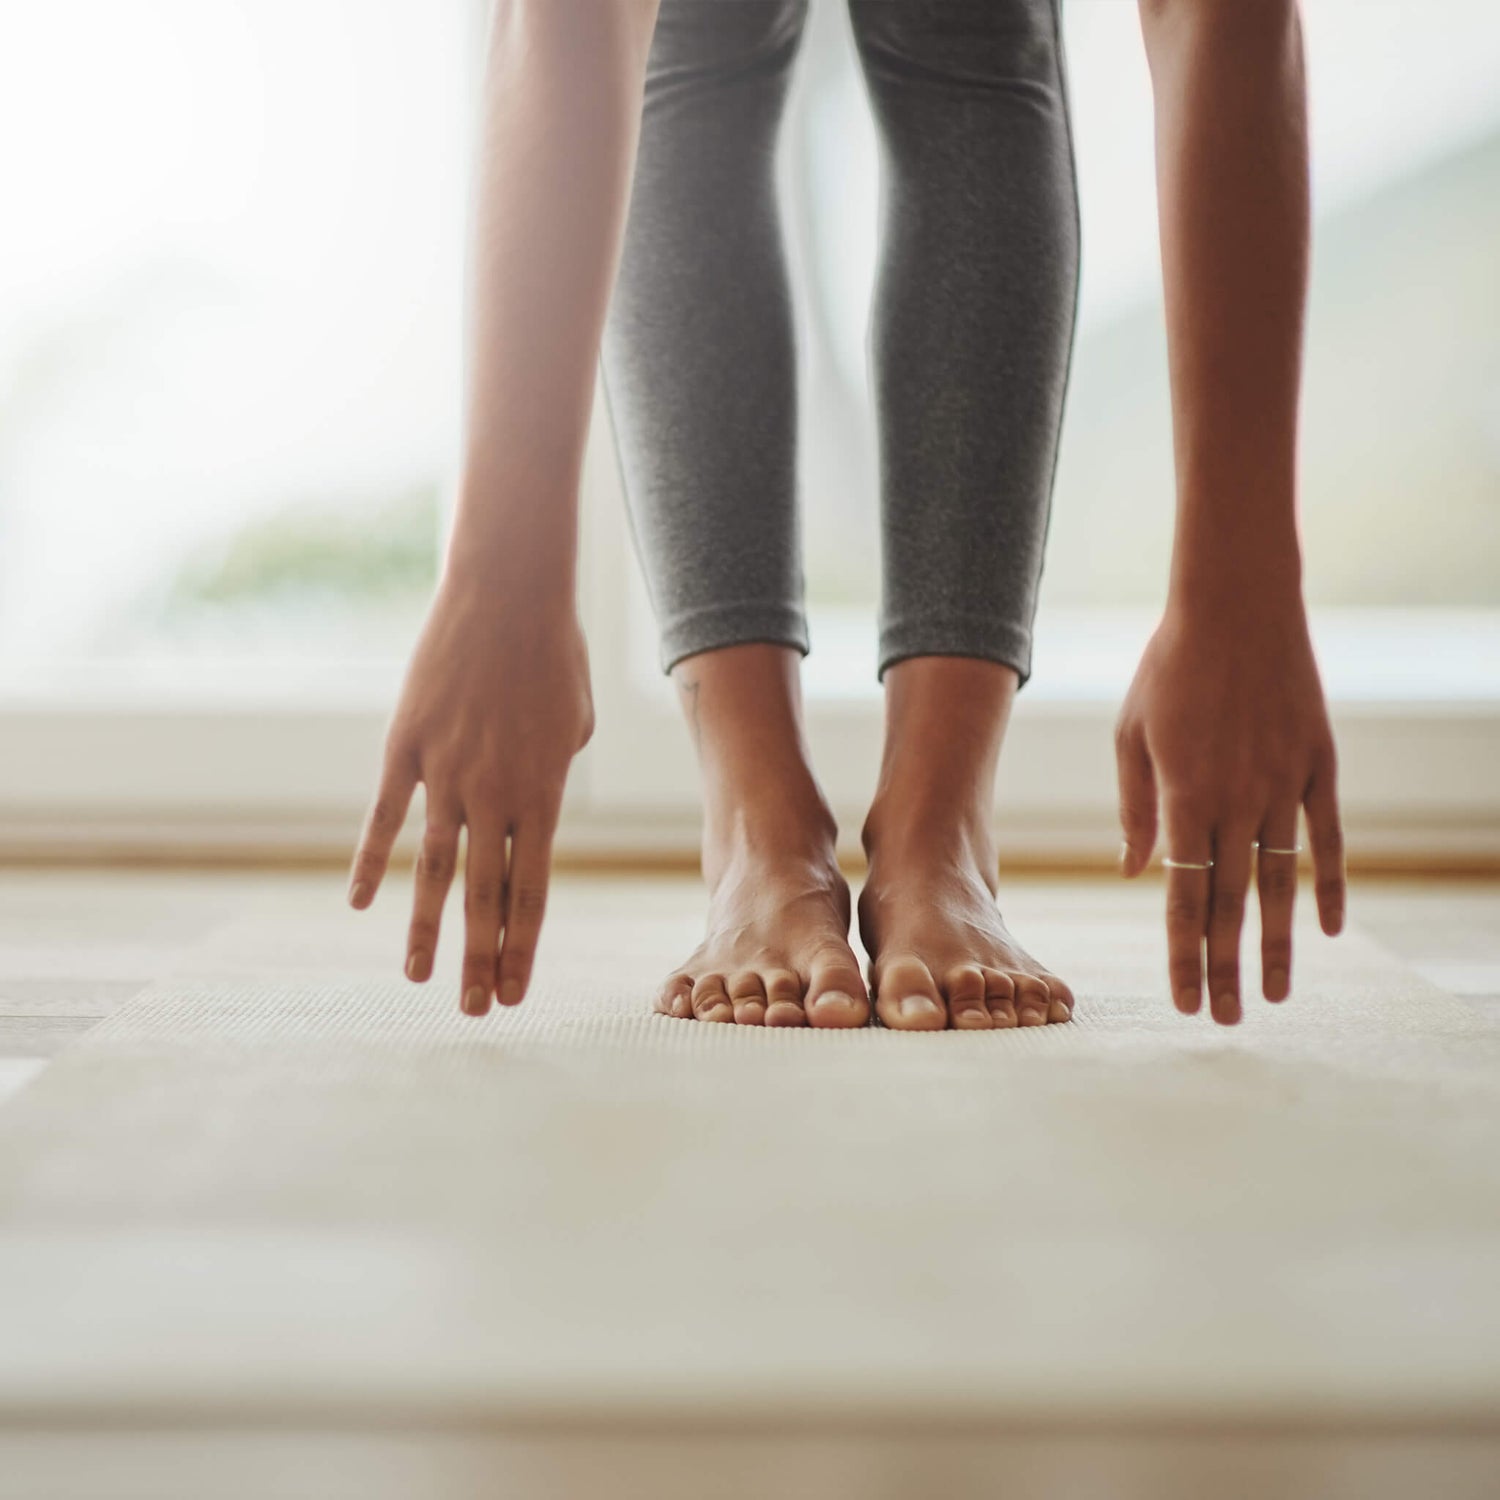 Women stretching her hands to touch her toes